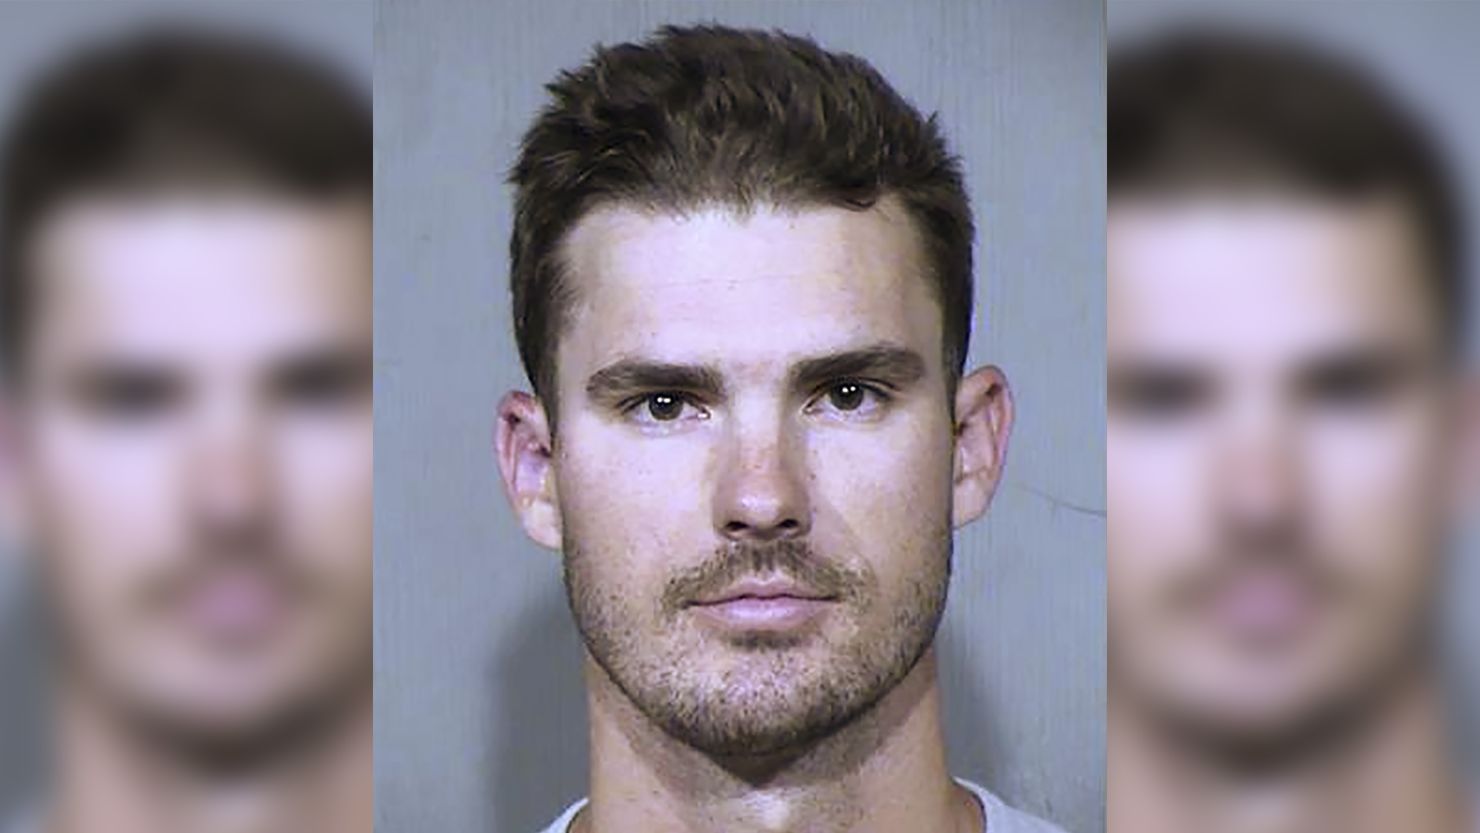 The booking photo of Jacob Nix provided by the Maricopa County Sheriff's Office.